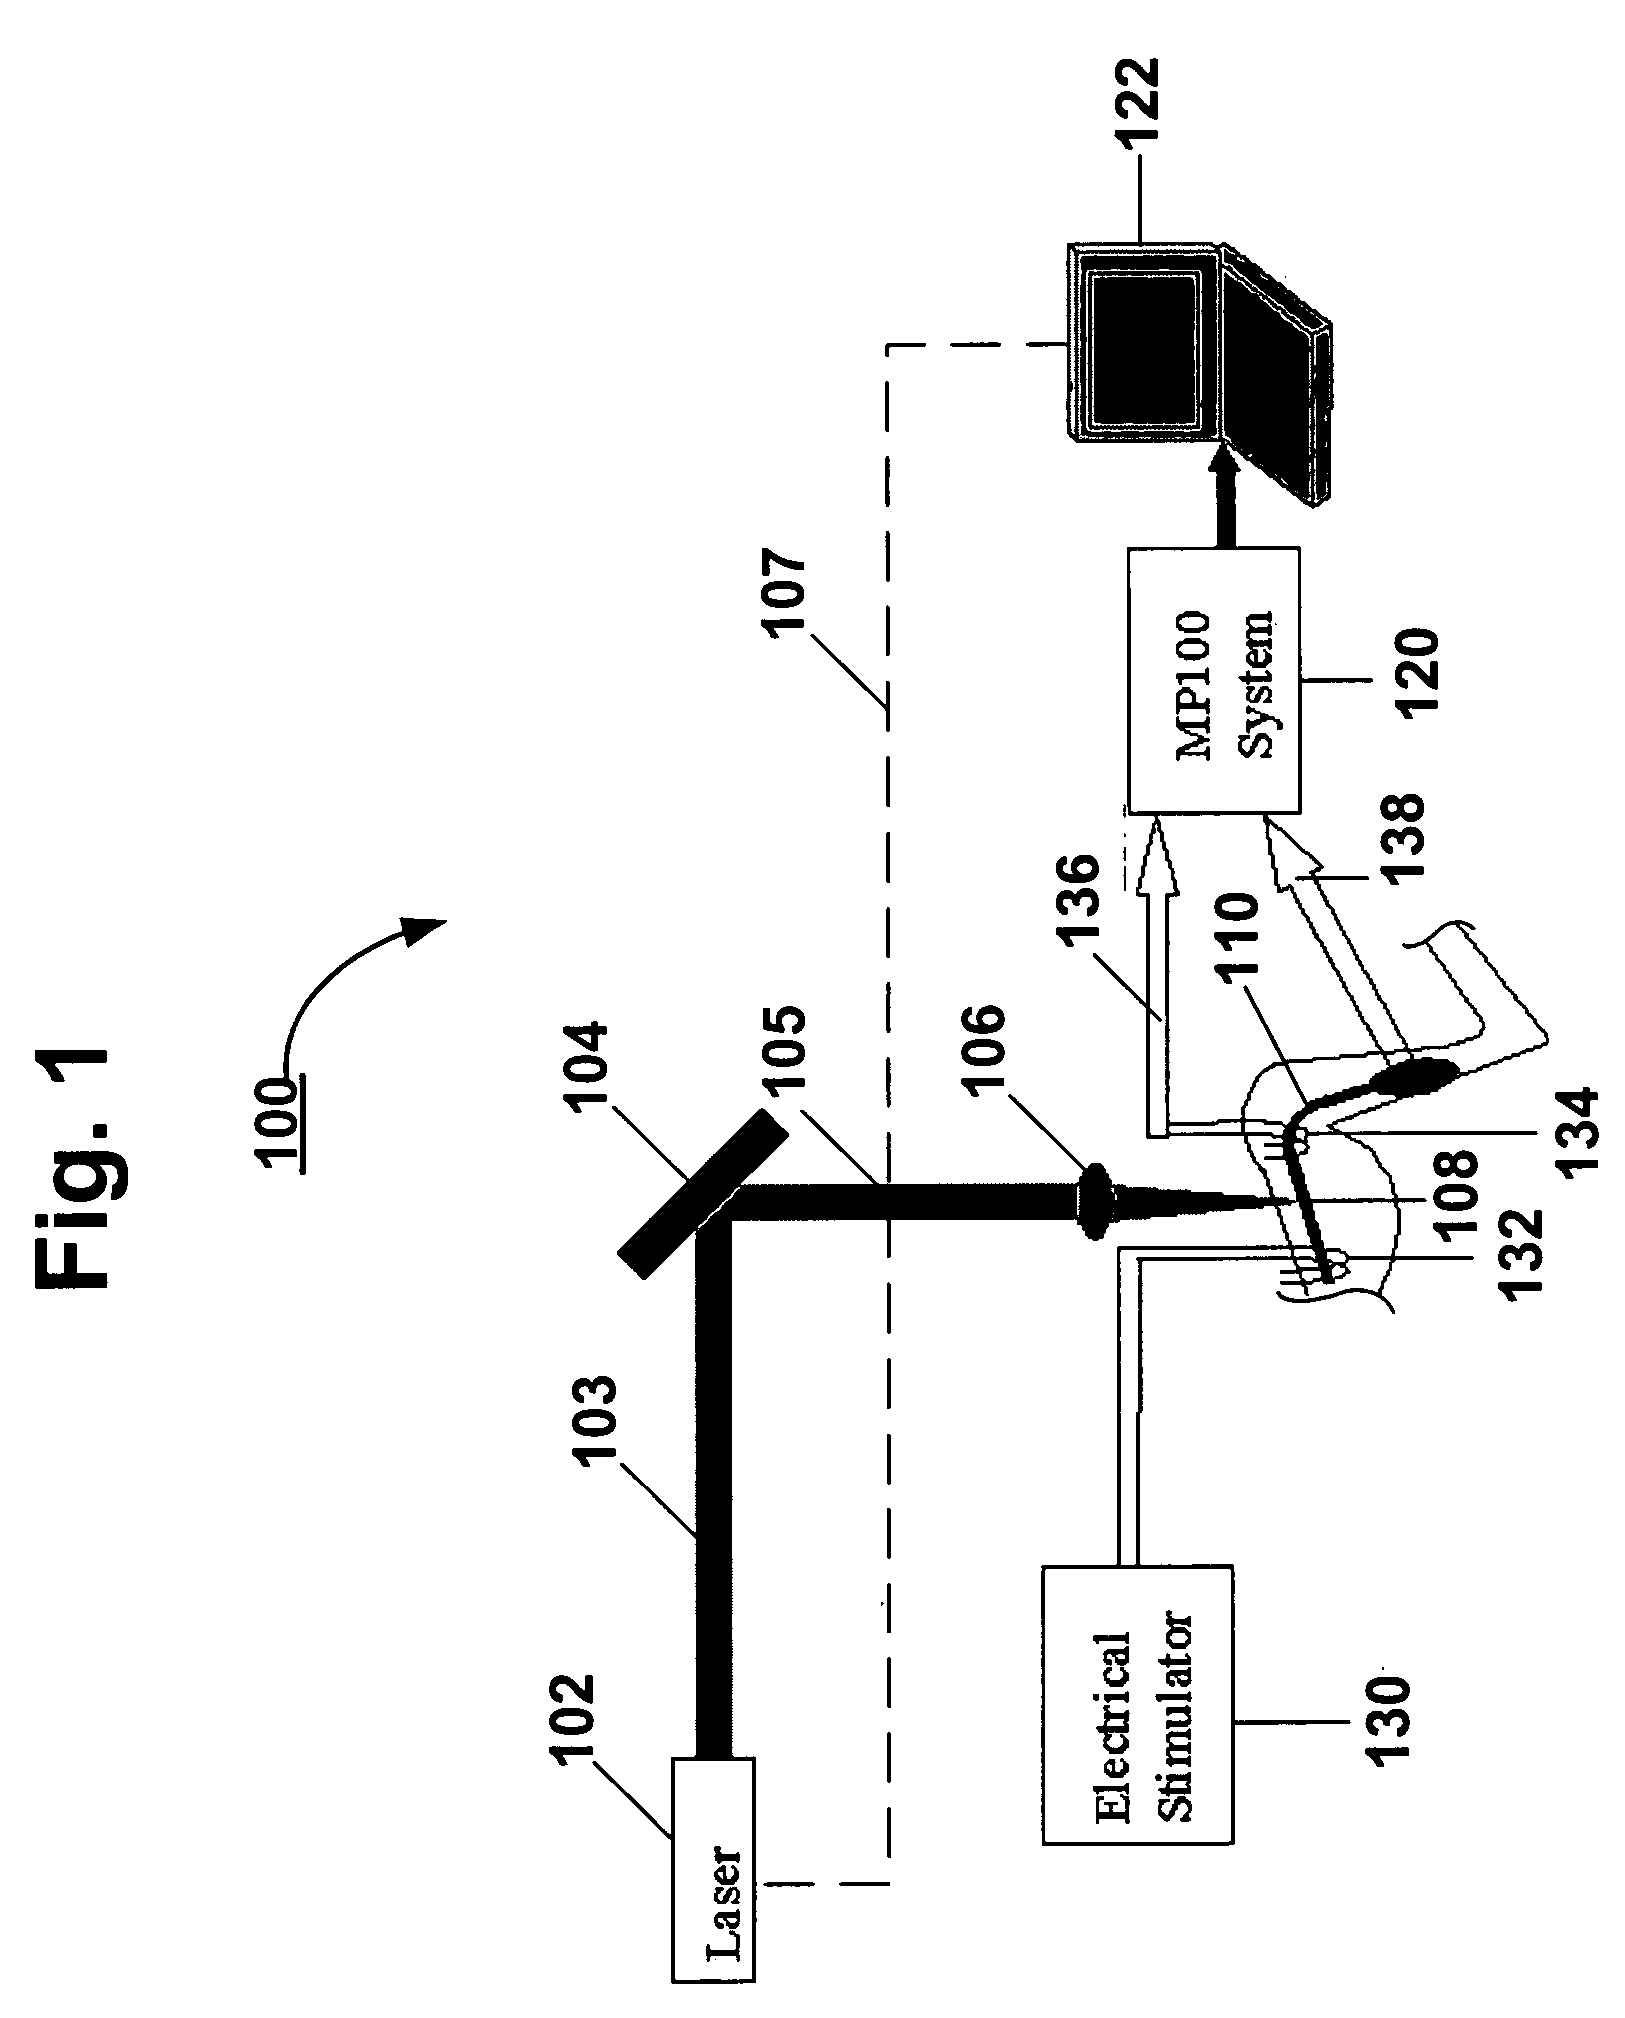 System and methods for optical stimulation of neural tissues